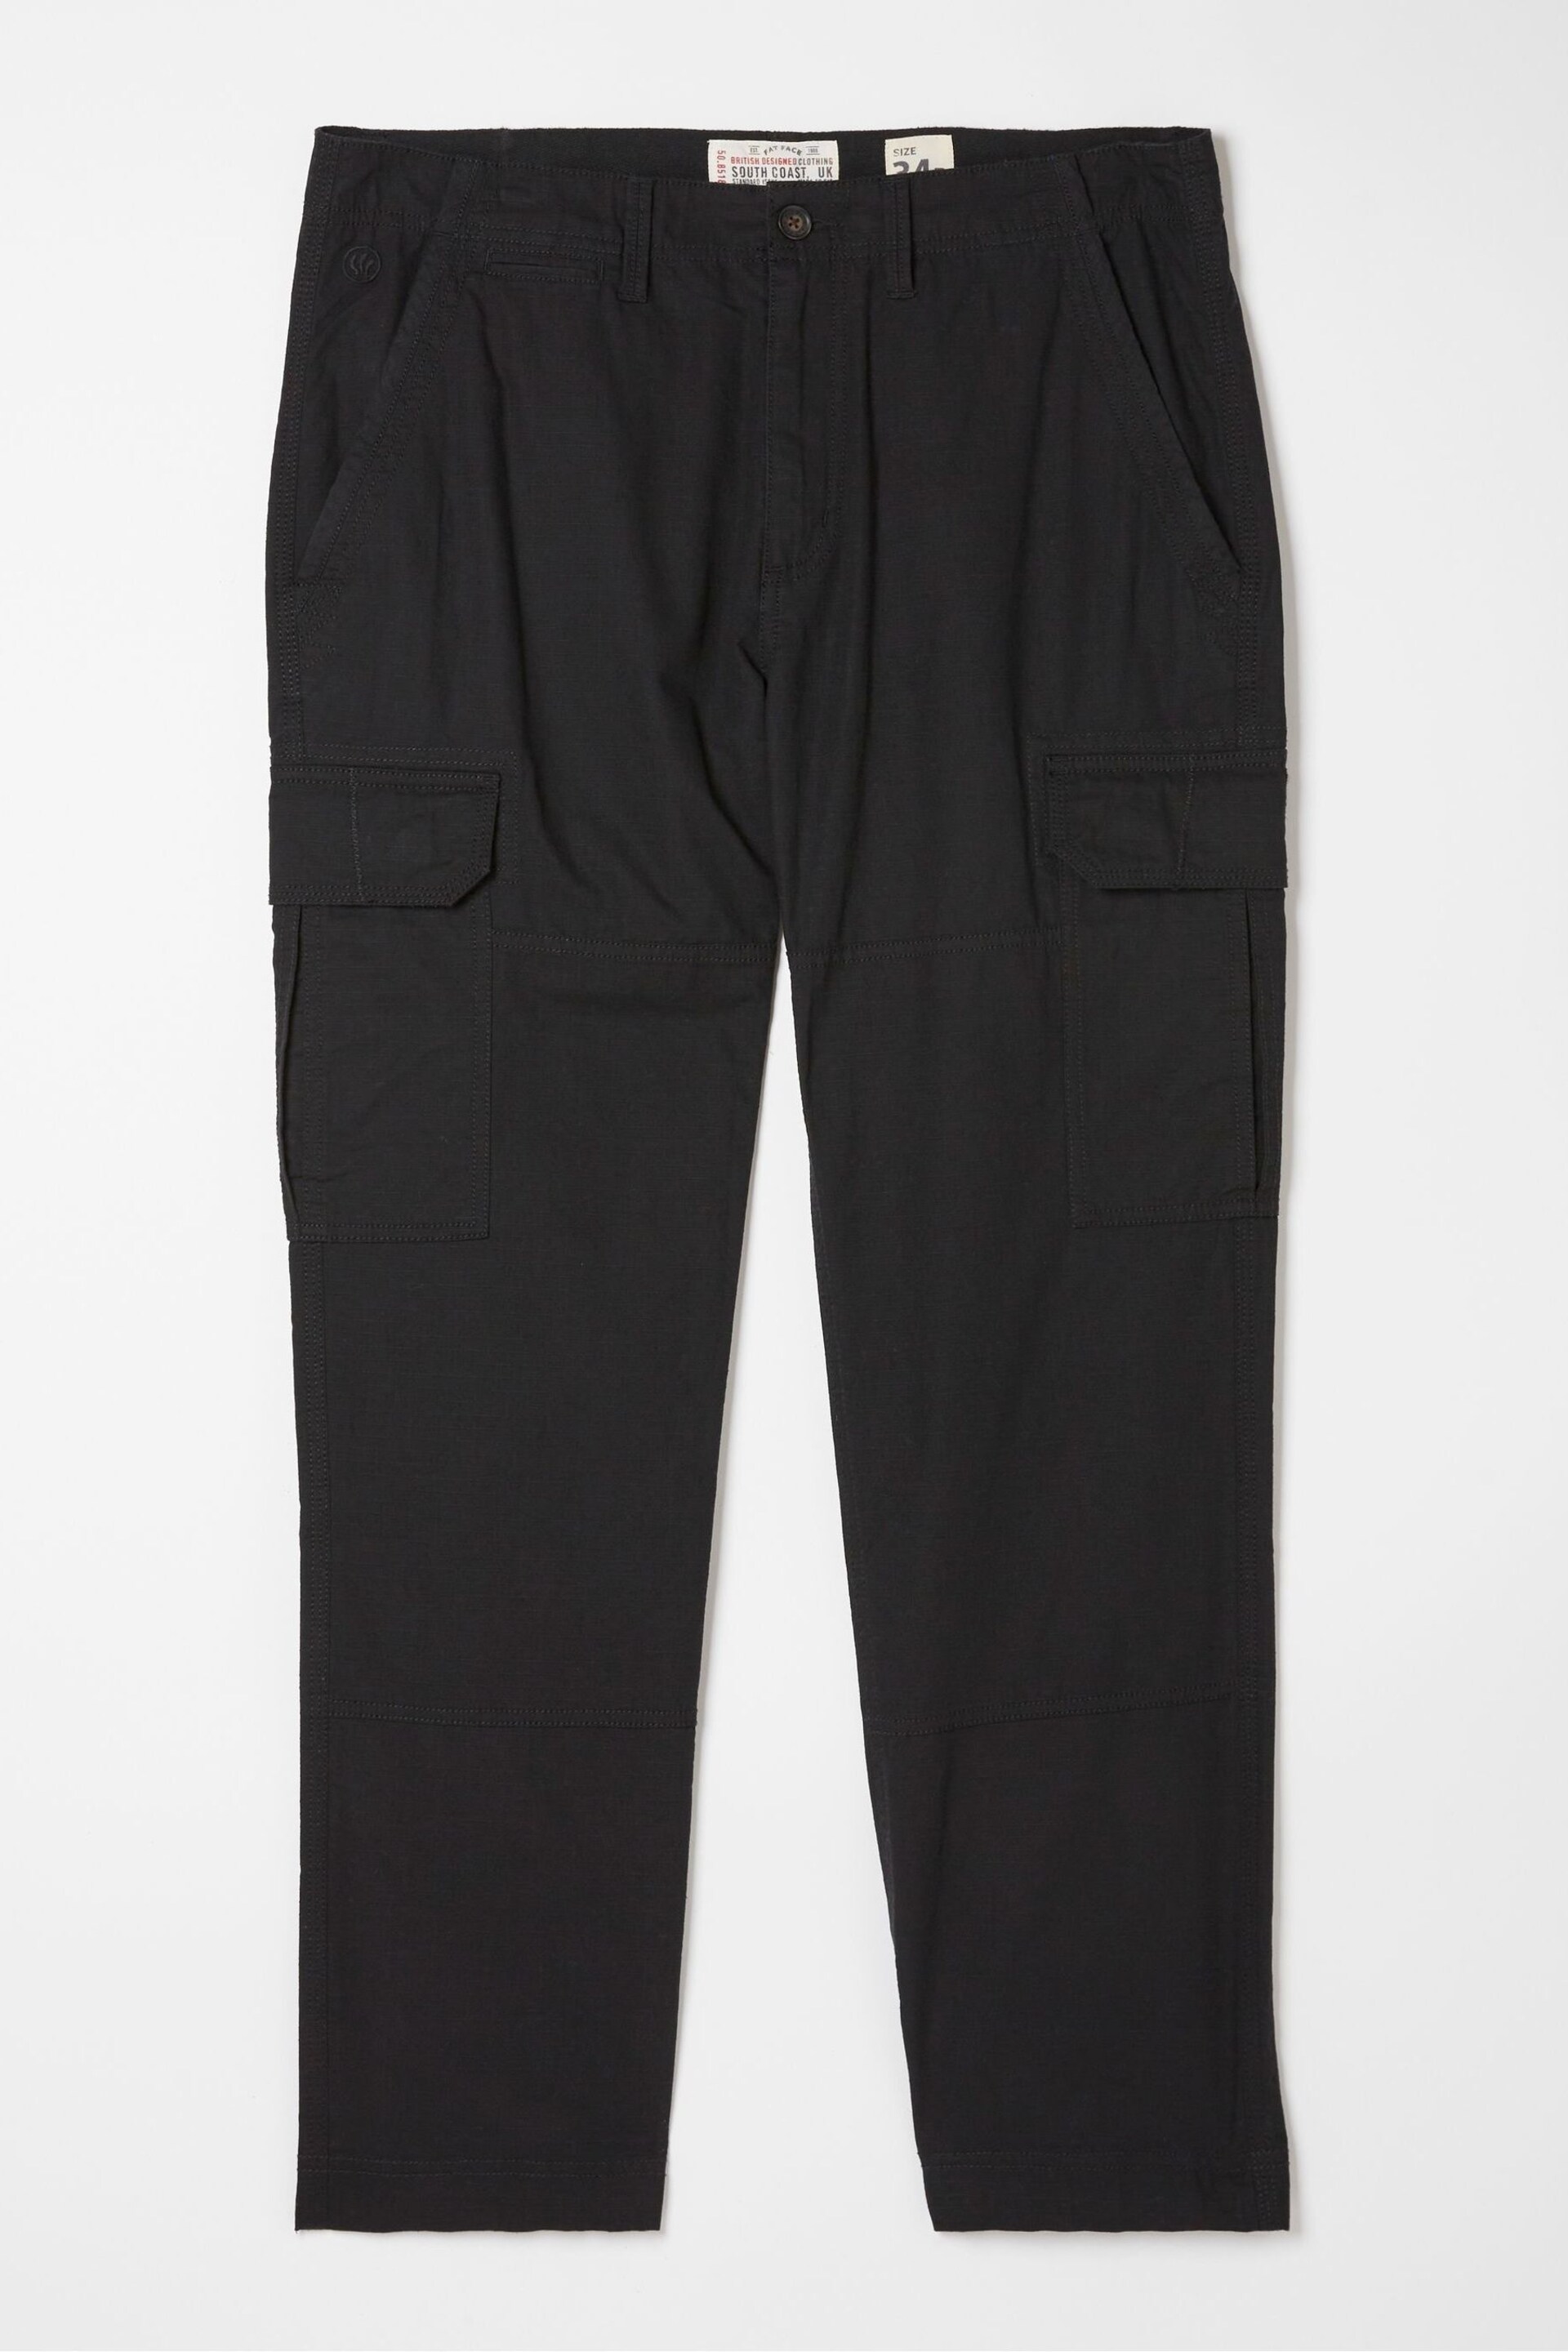 FatFace Black Ripstop Cargo Trousers - Image 5 of 5